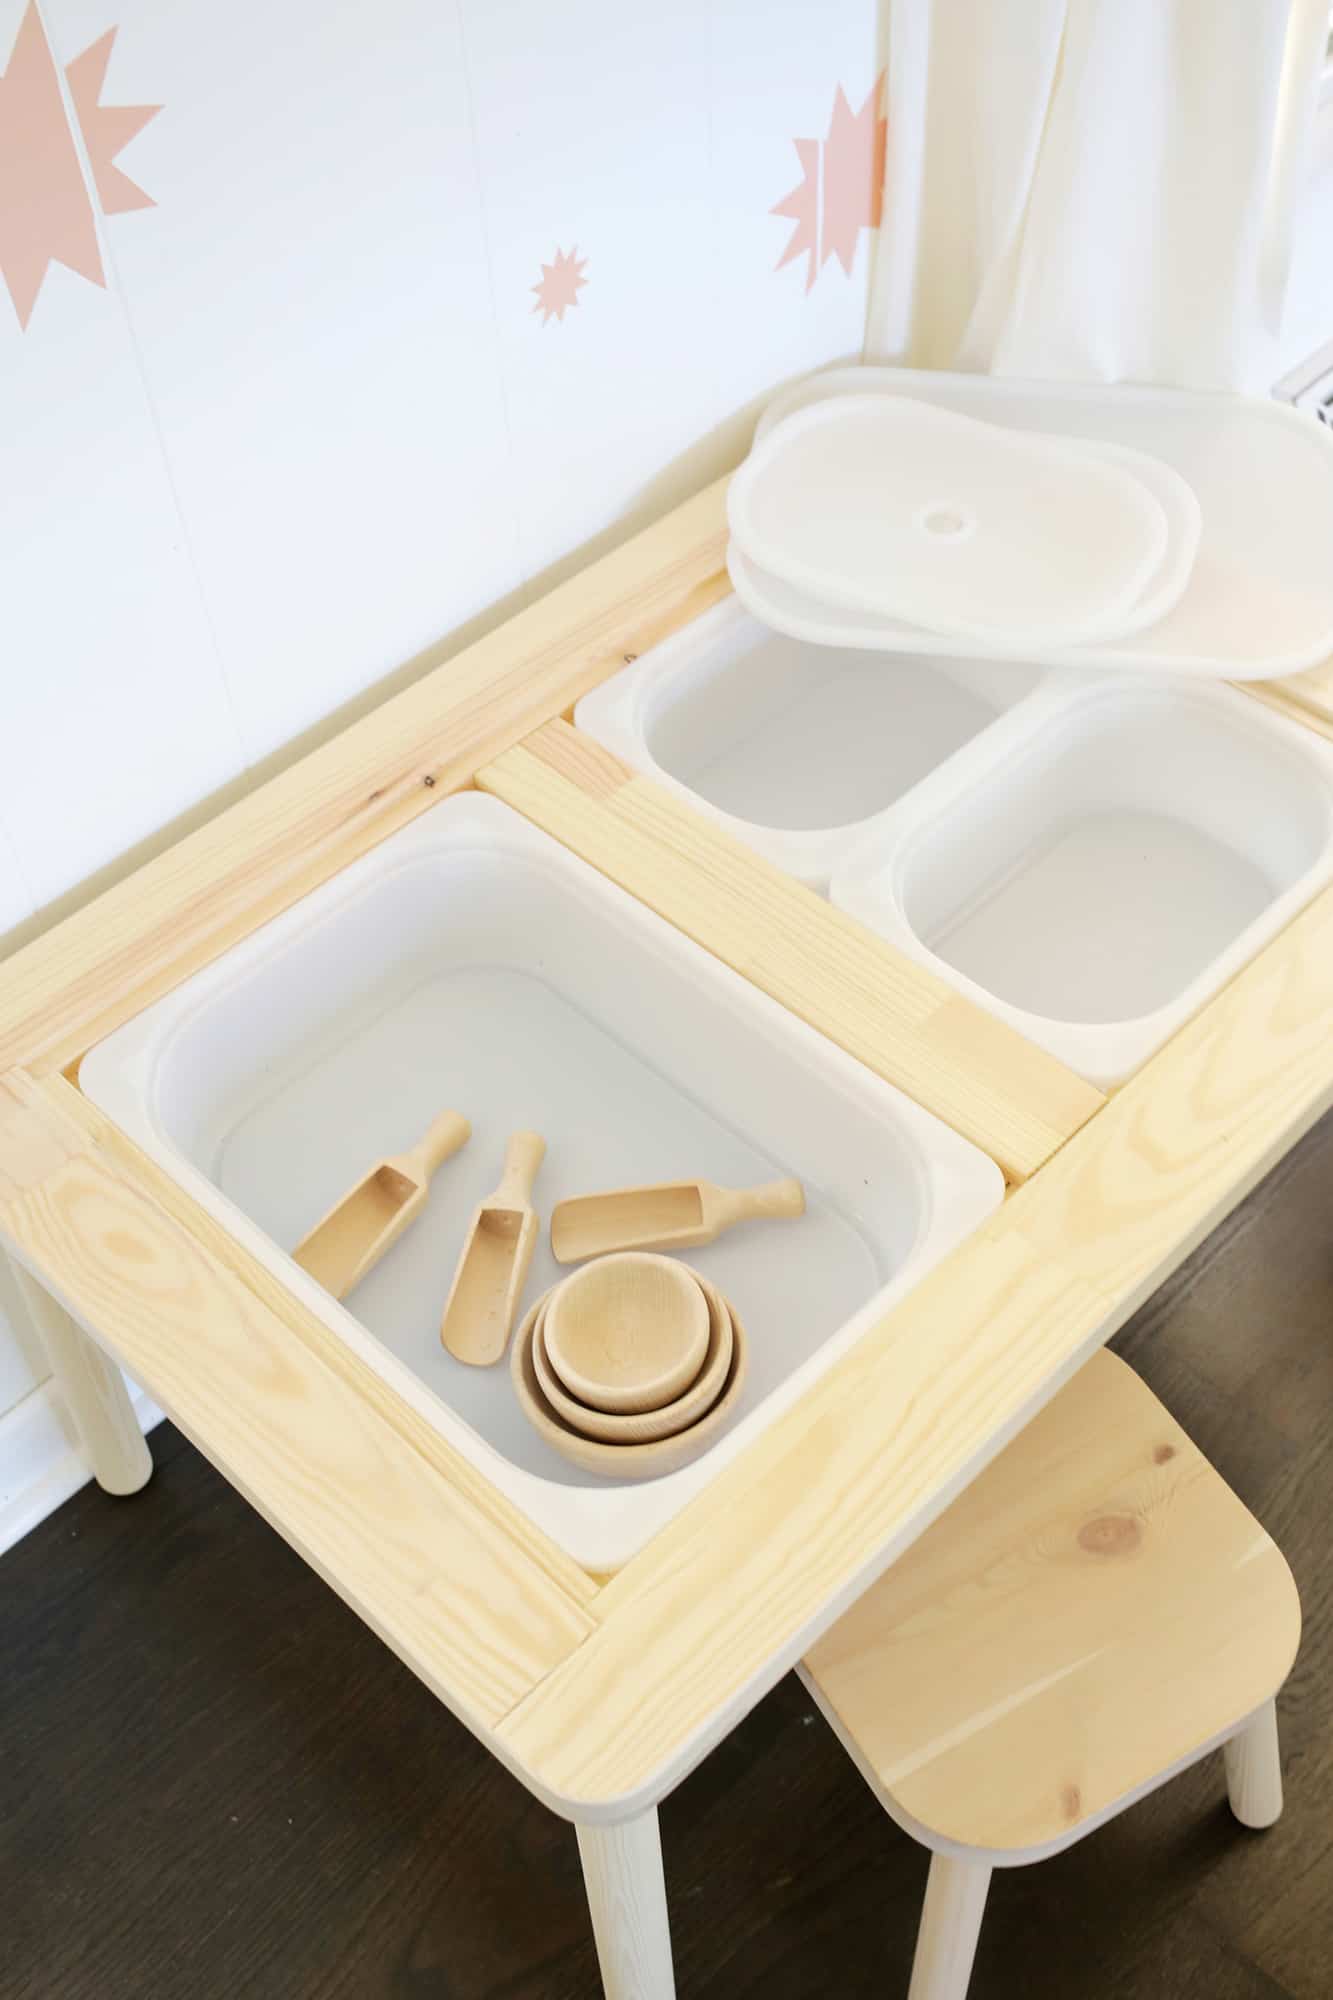 wooden sensory table with white bins in it and wooden scoops and wooden bowls